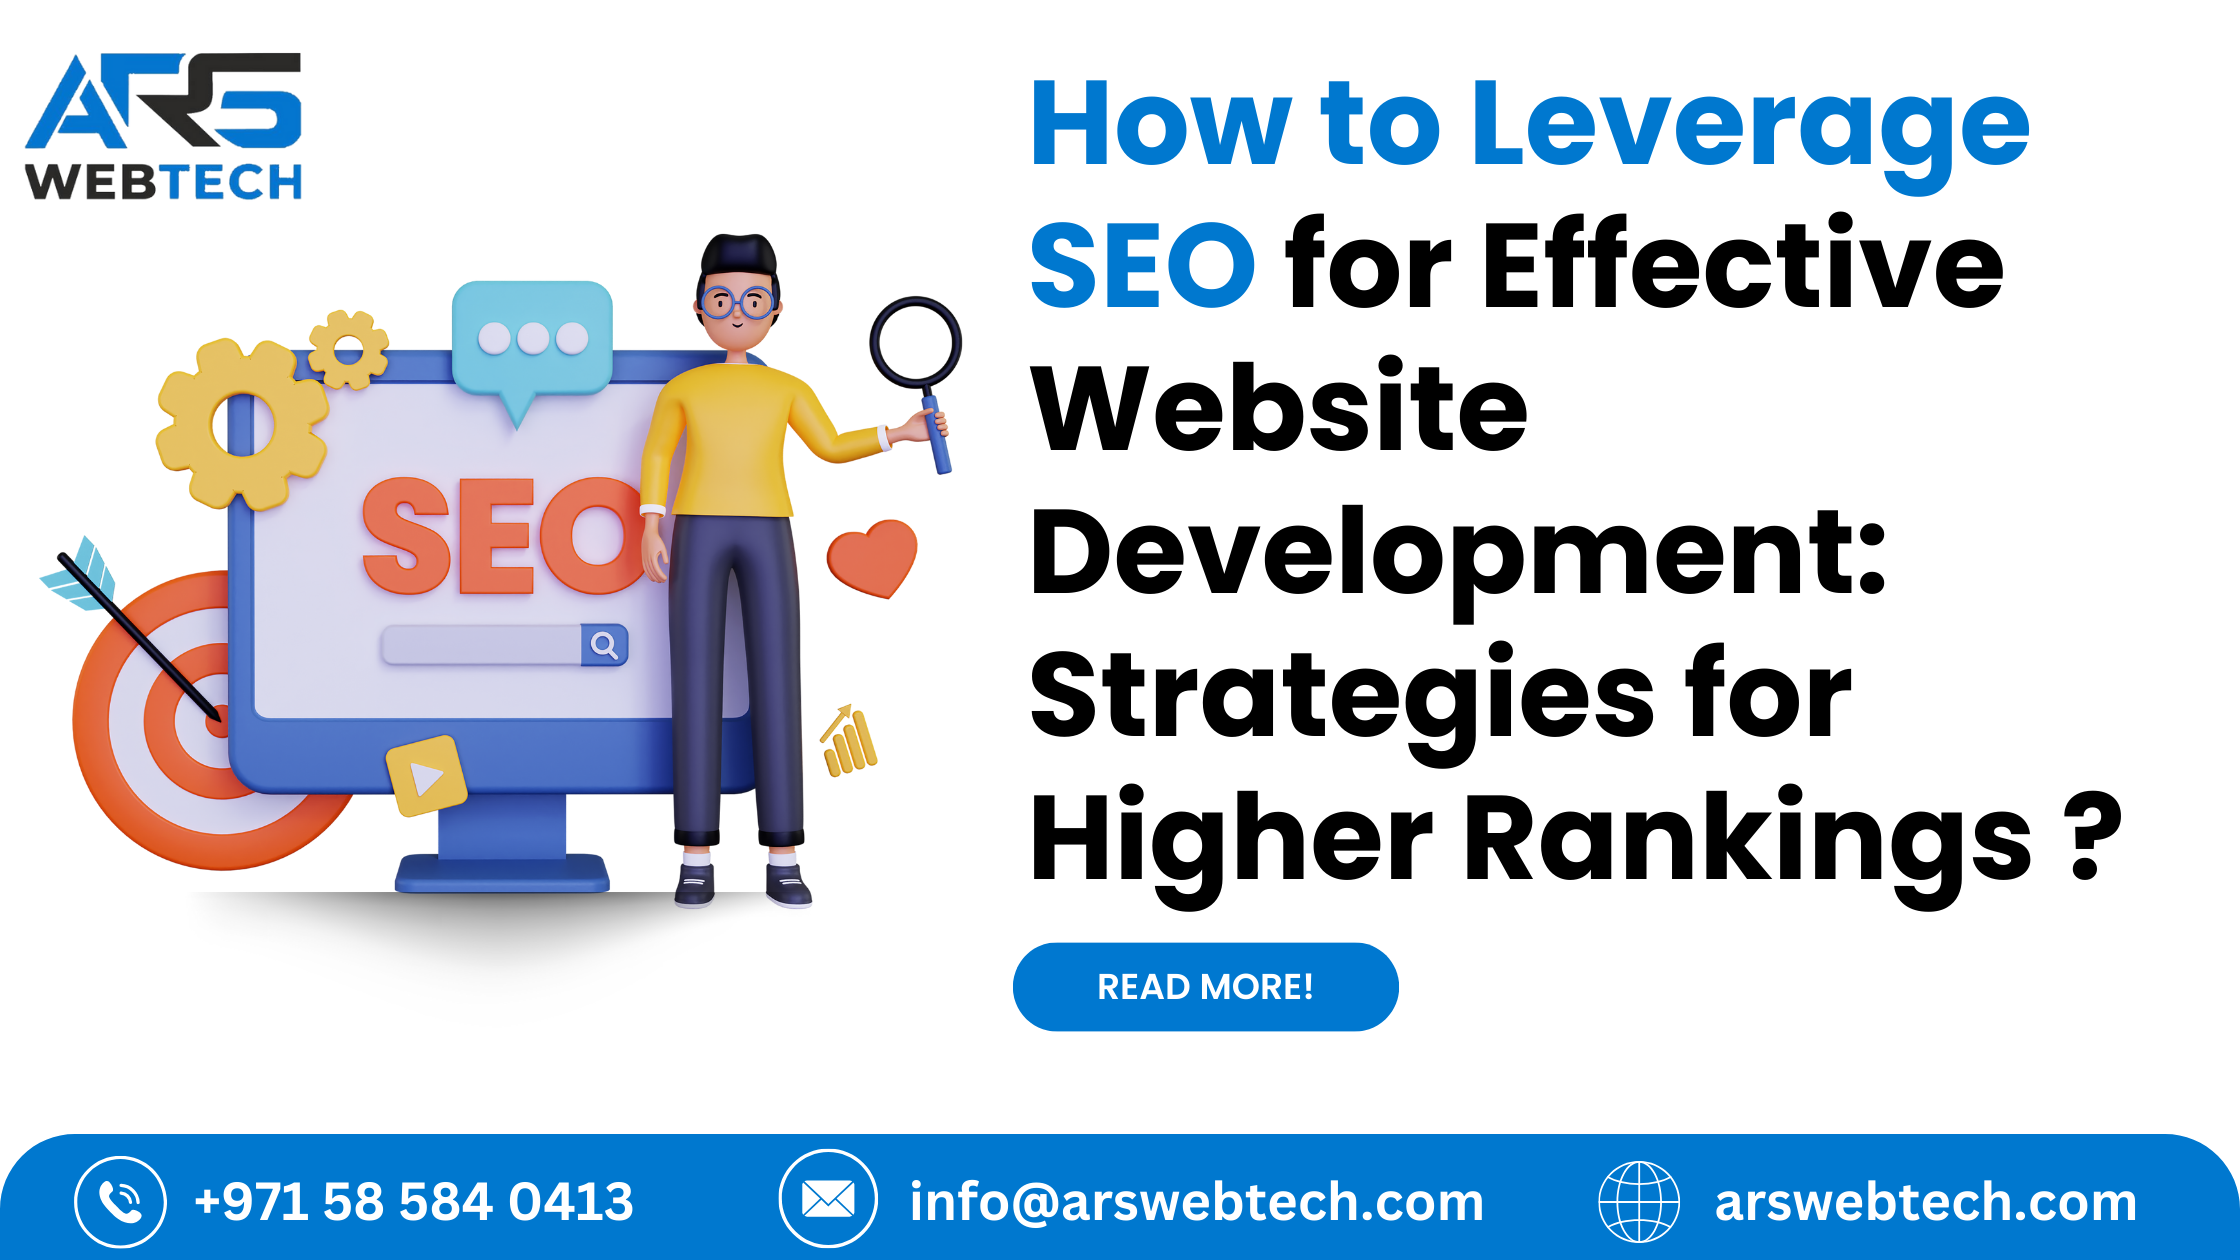 How to Leverage SEO for Effective Website Development: Strategies for Higher Rankings